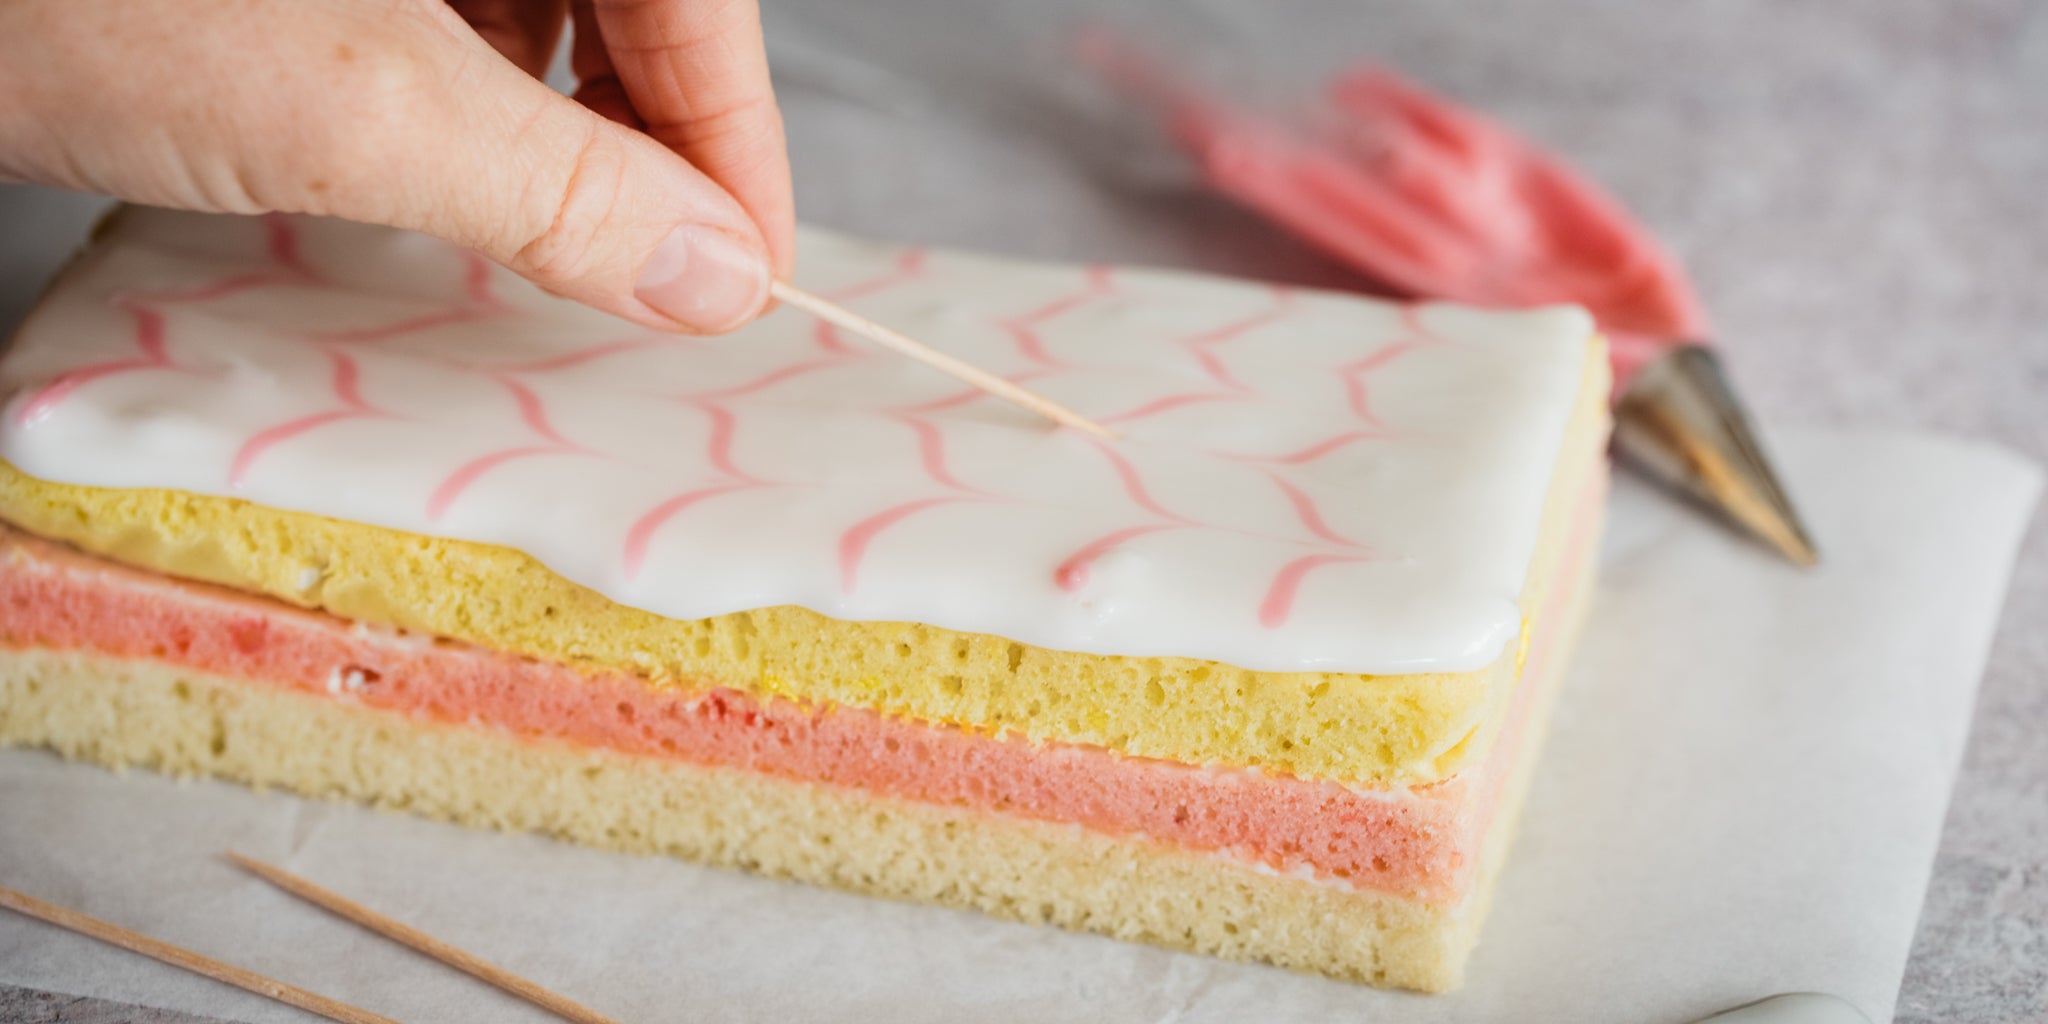 Hand feathering the icing with a toothpick